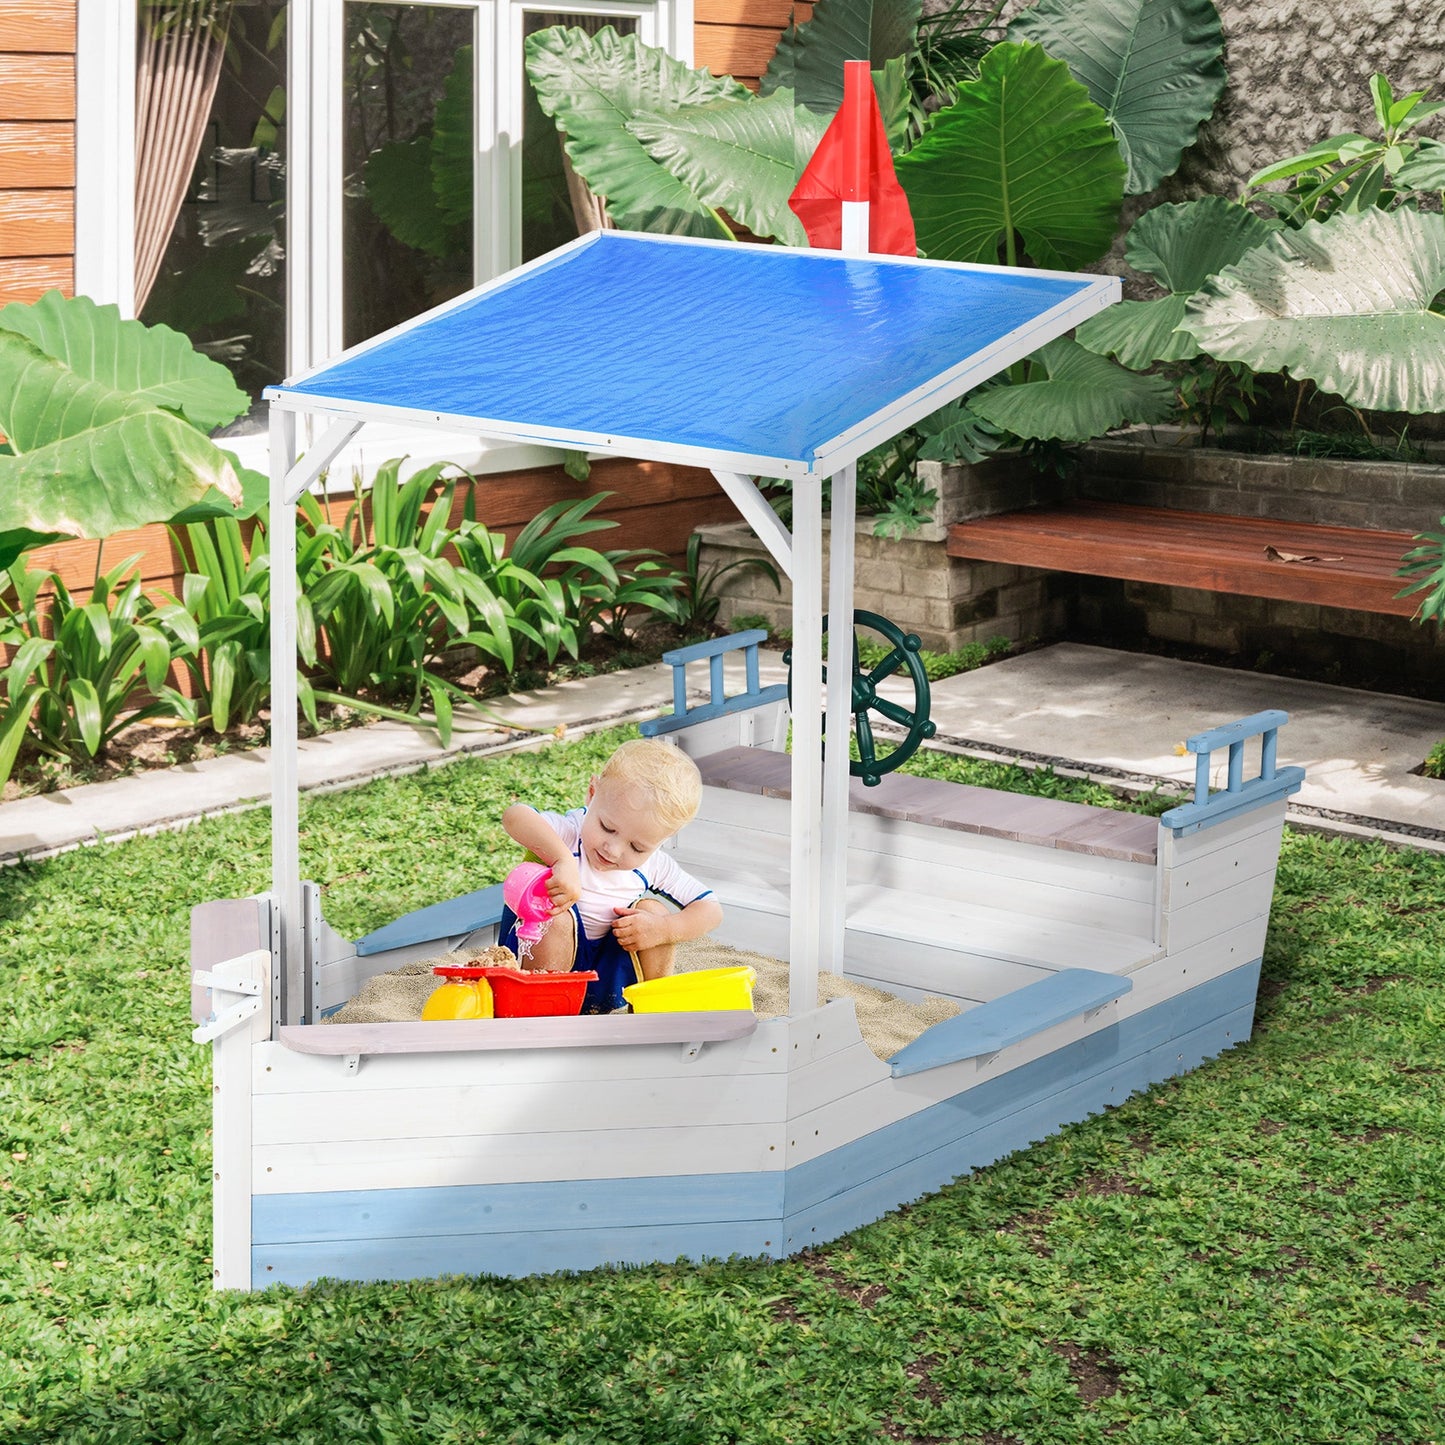 -Outsunny Wooden Sandbox with UV-resistant Canopy, Kids Sandboat for Outdoor Backyard with Bench Seats, Gift for 3-8 Years Old, 82.75" x 43.25", Blue - Outdoor Style Company